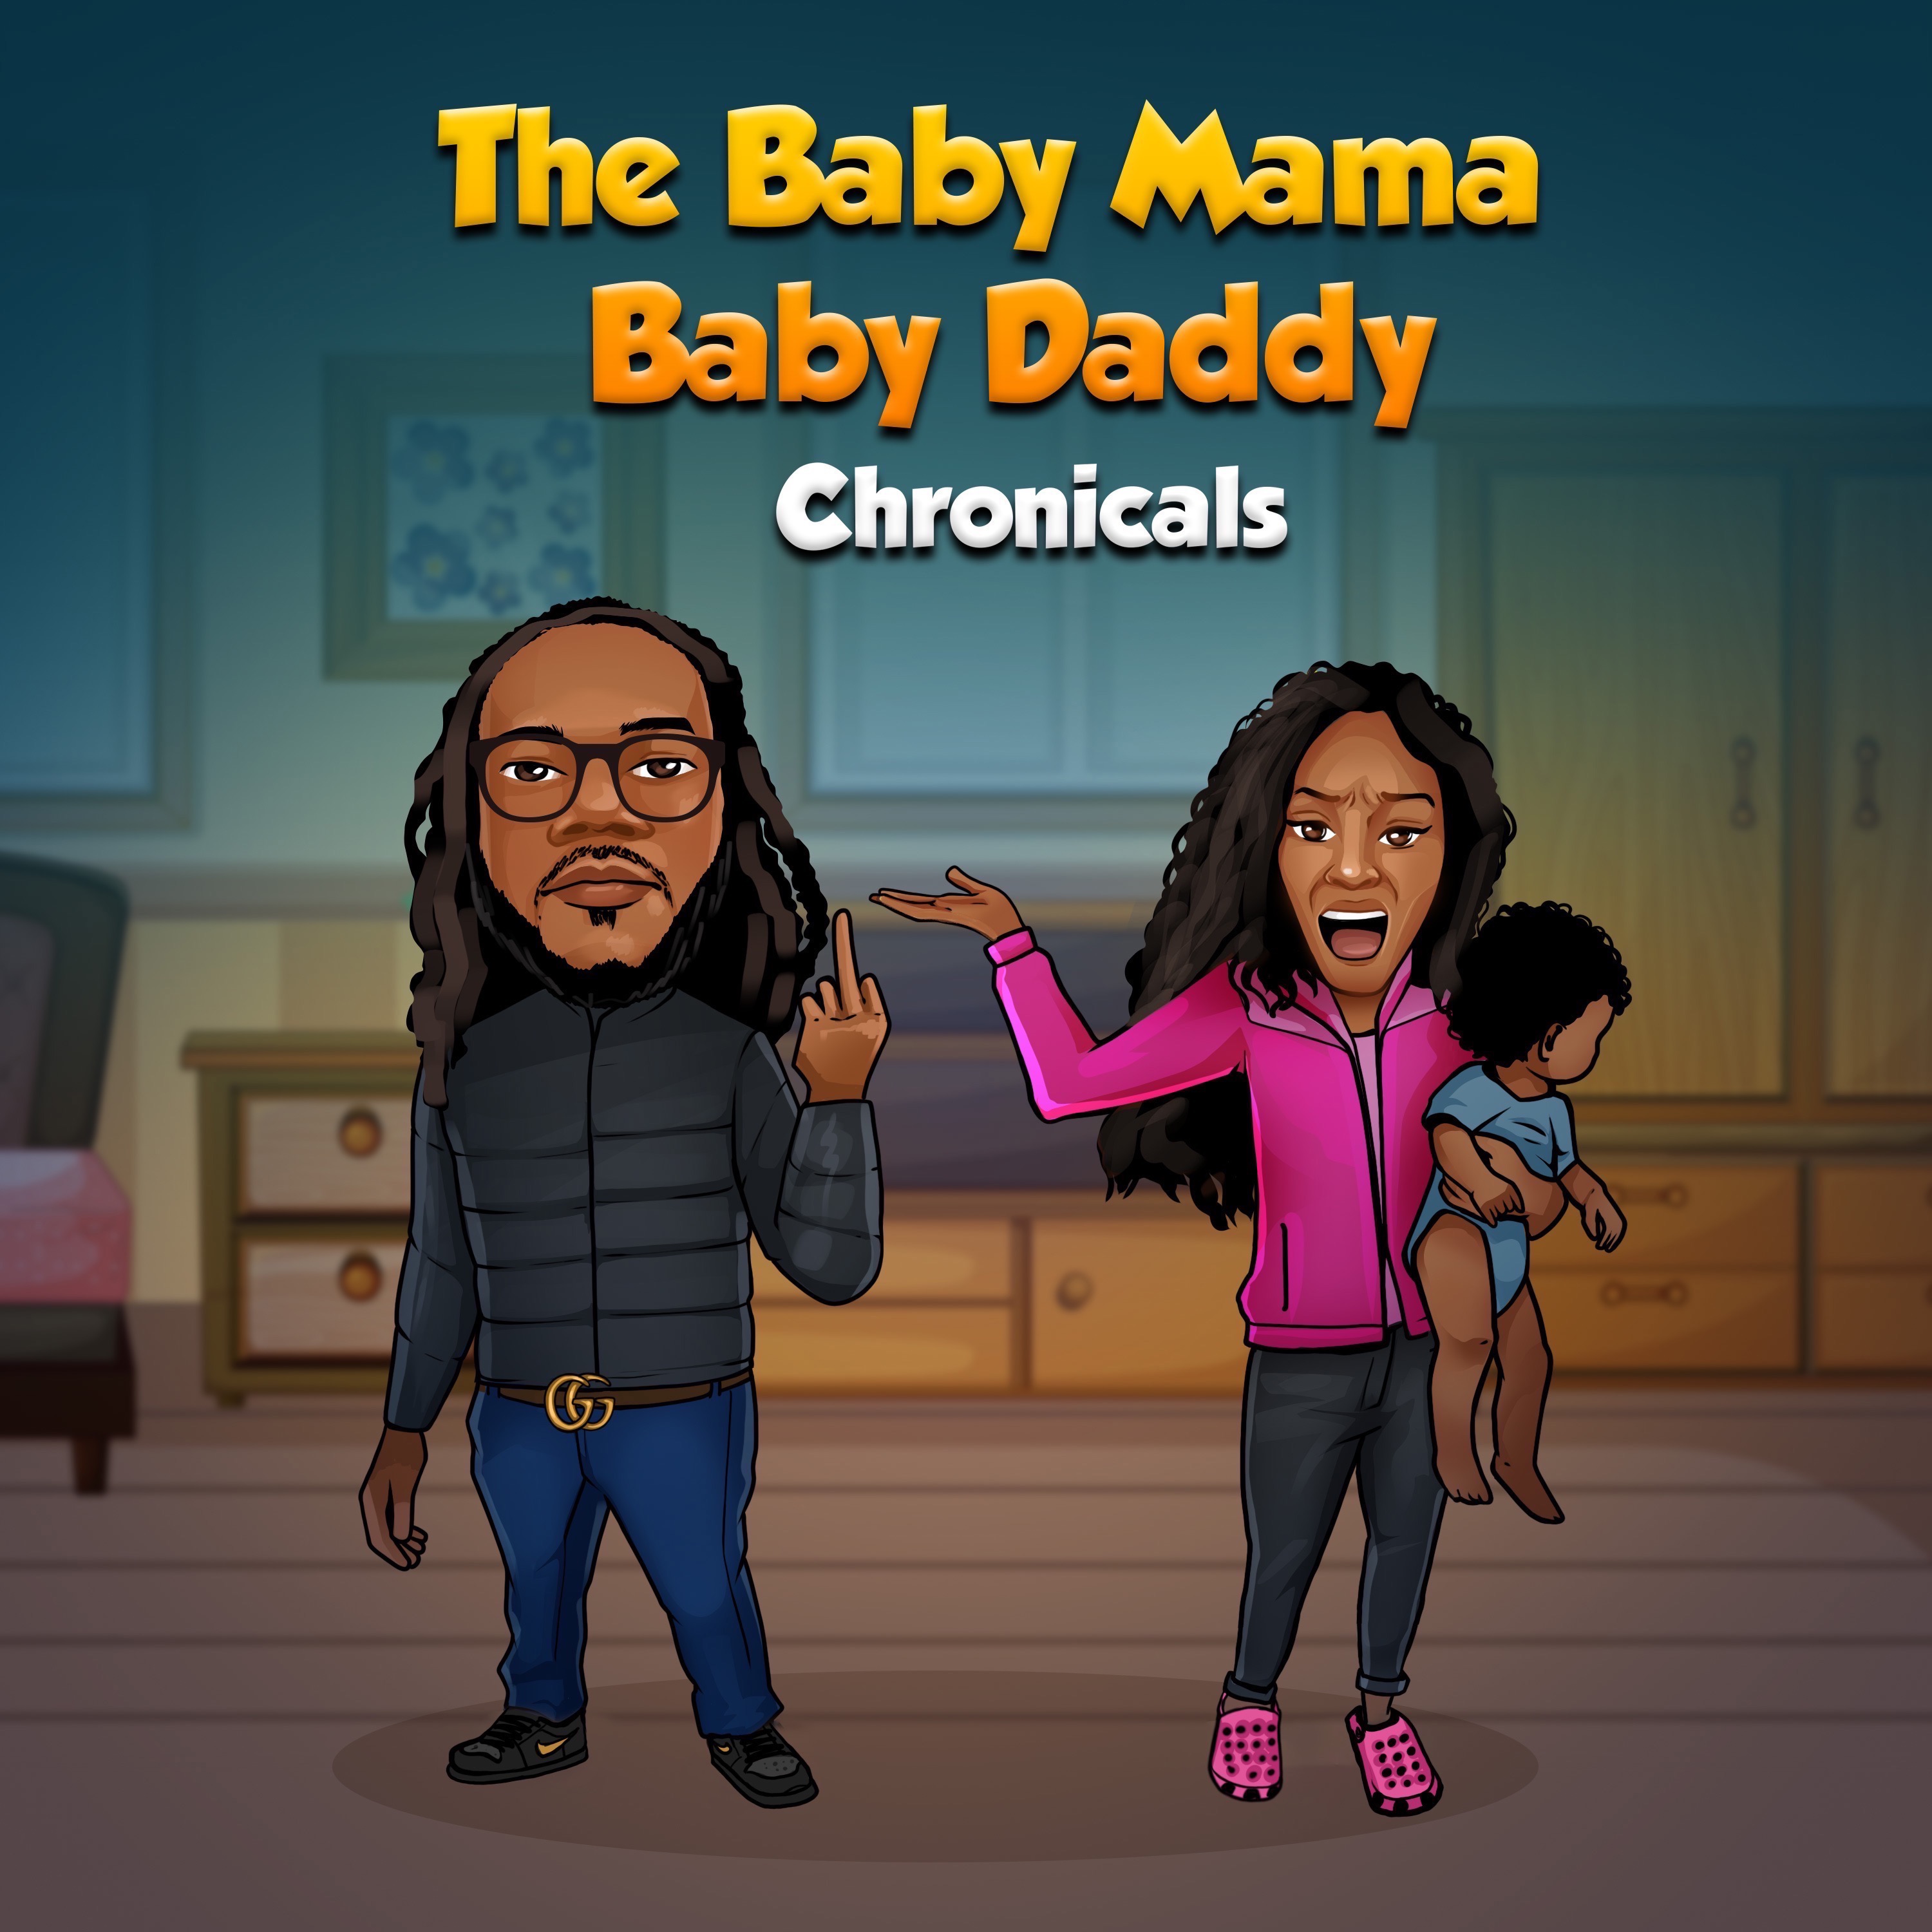 The Baby Mama Baby Daddy Chronicals